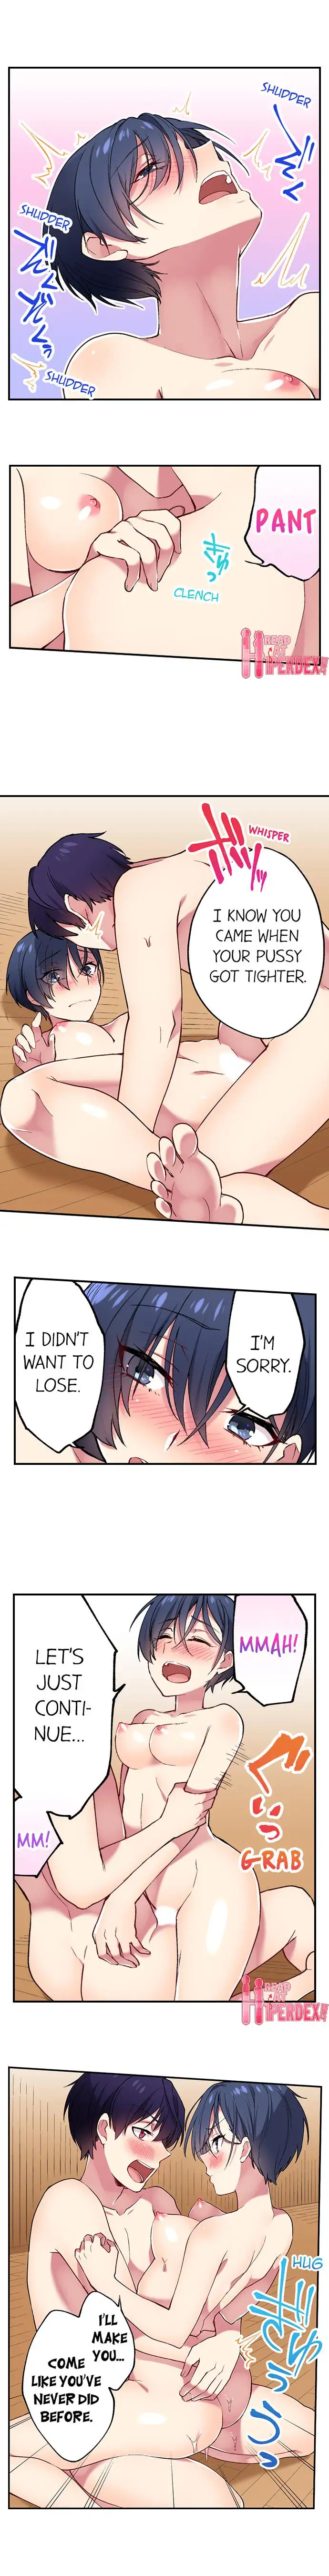 Committee Chairman, Didn’t You Just Masturbate In the Bathroom? I Can See the Number of Times People Orgasm - Chapter 57 Page 6